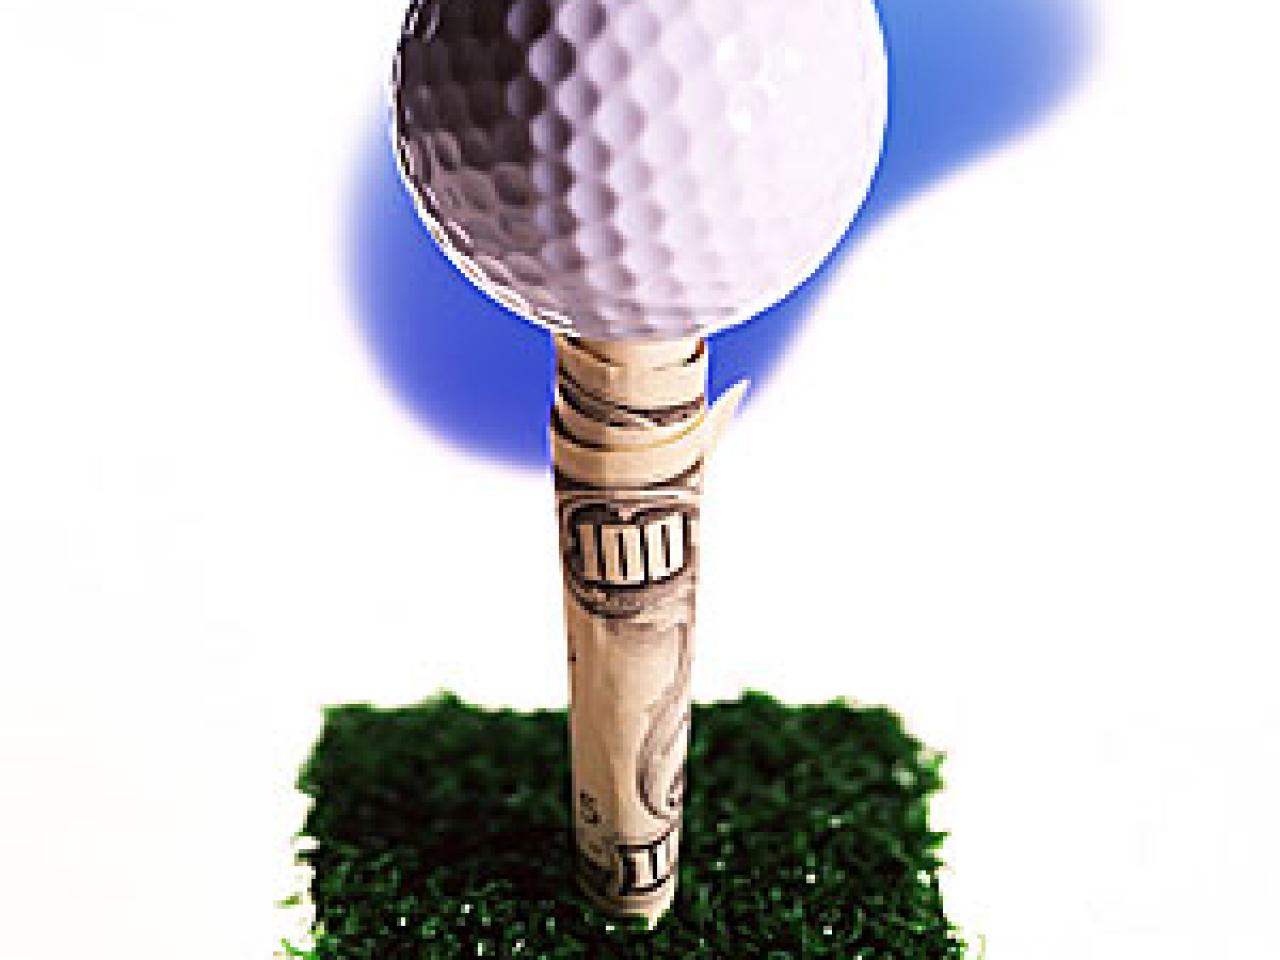 Golf Betting Get Two Strokes Per Hole